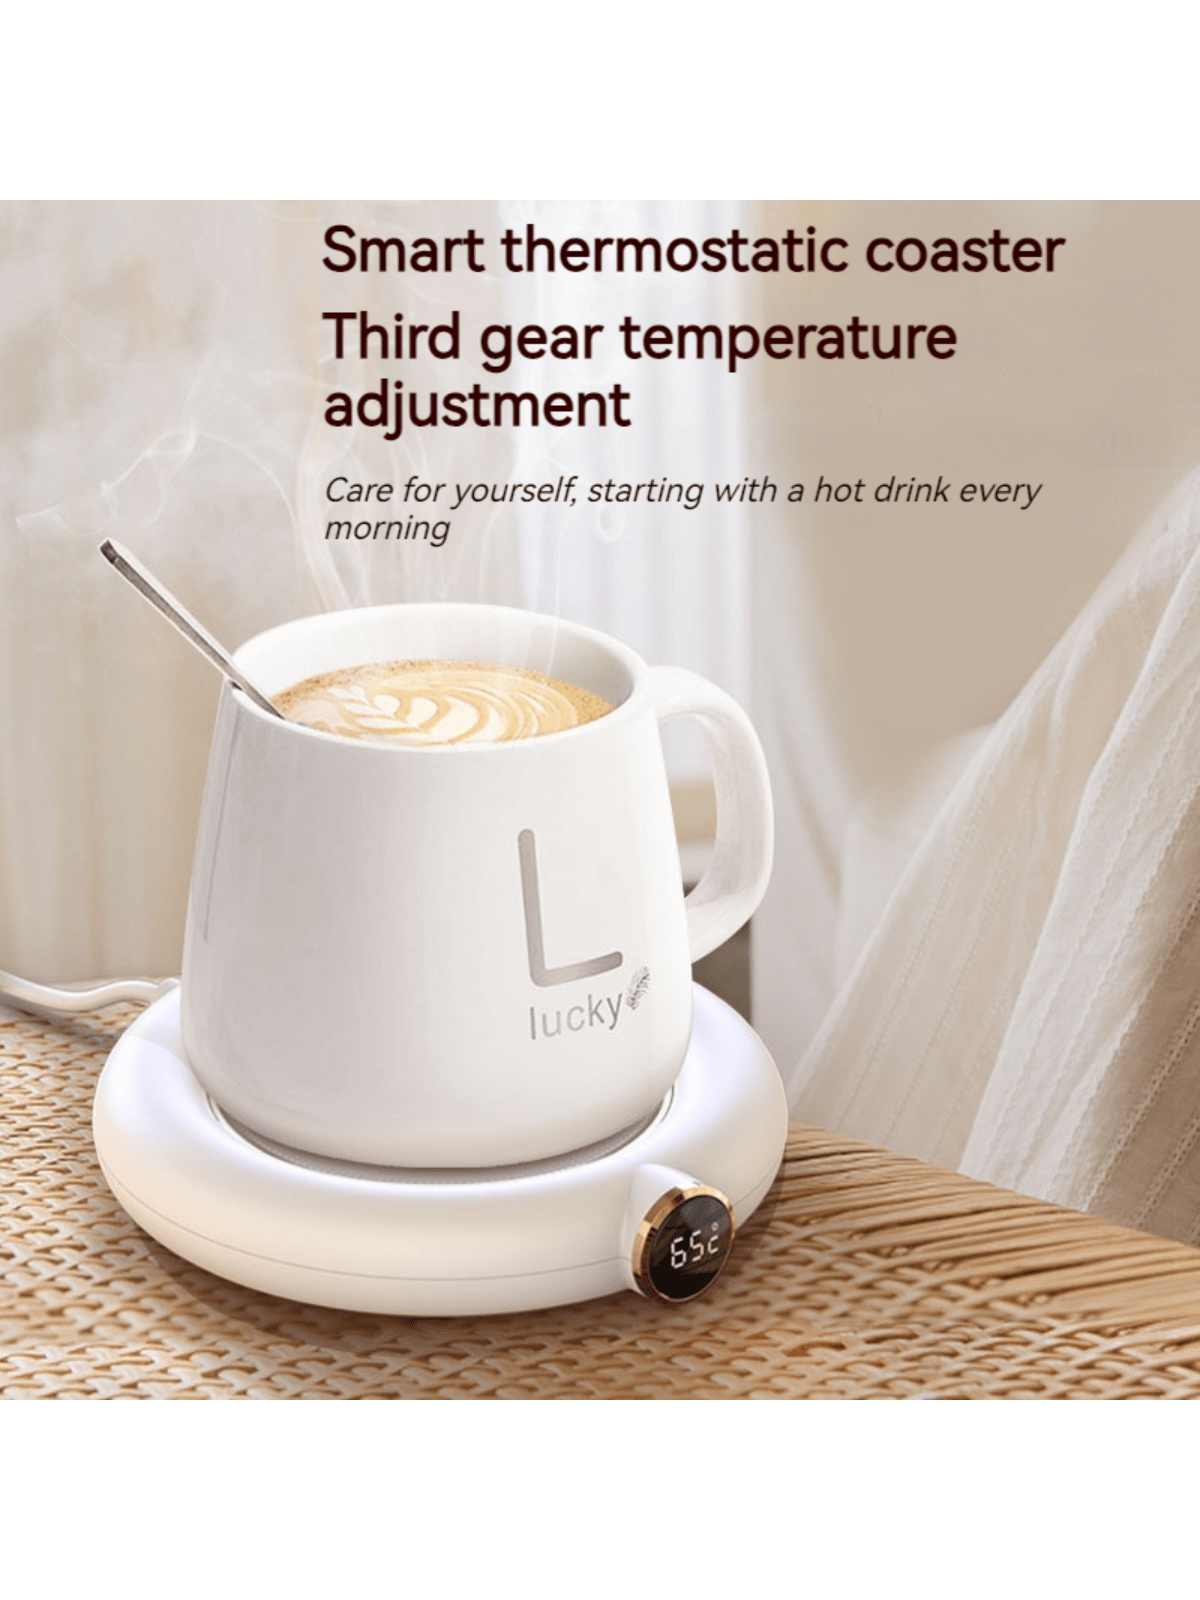 Smart Usb Cup Coffee,Battery Constant-temperatures Coaster